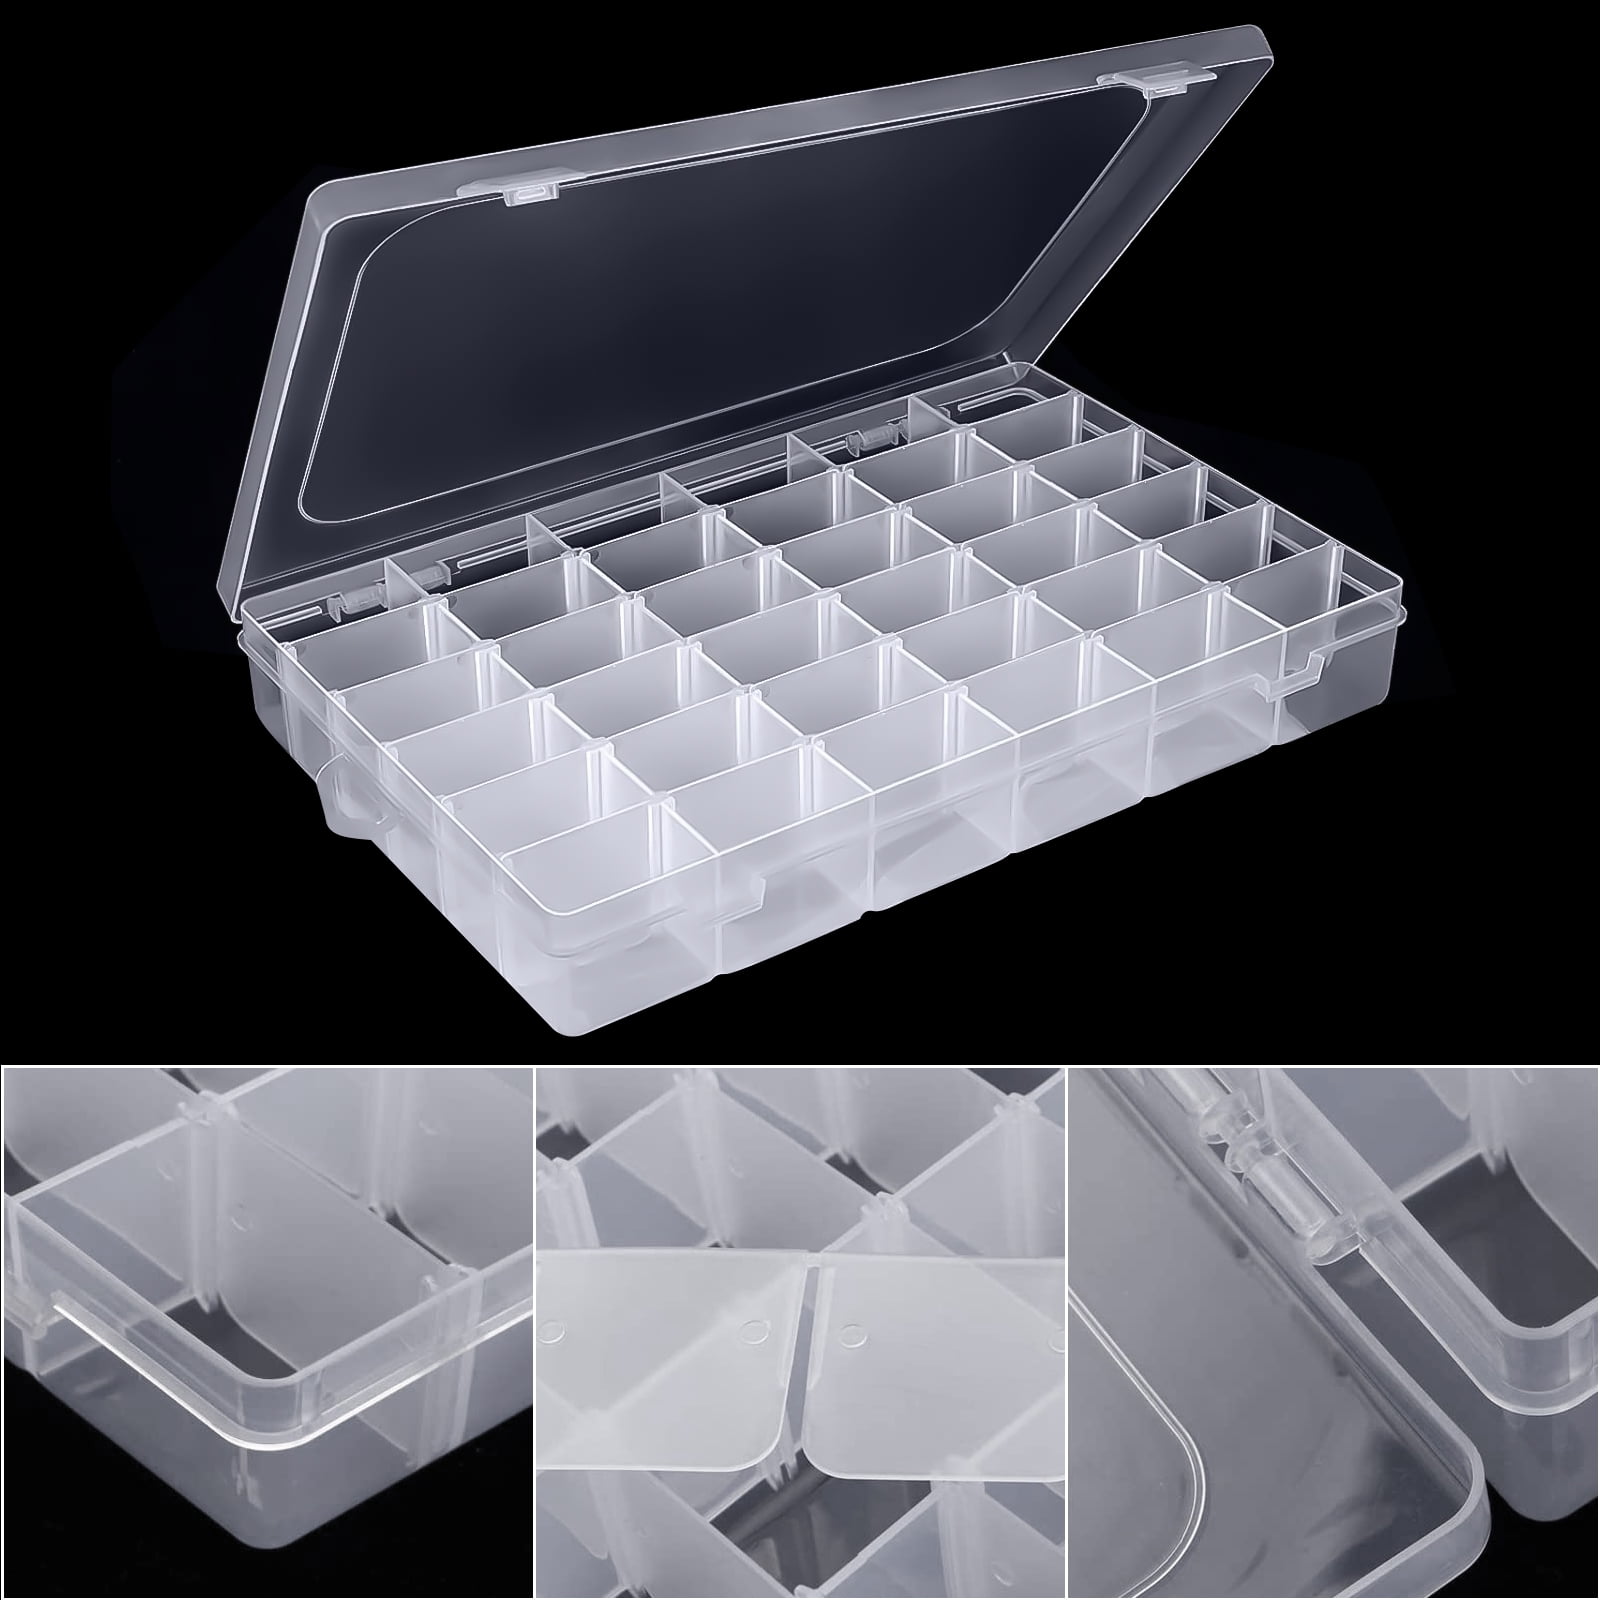 Multiple Compartments Transparent Box Case Jewelry Bead Craft Storage Container 